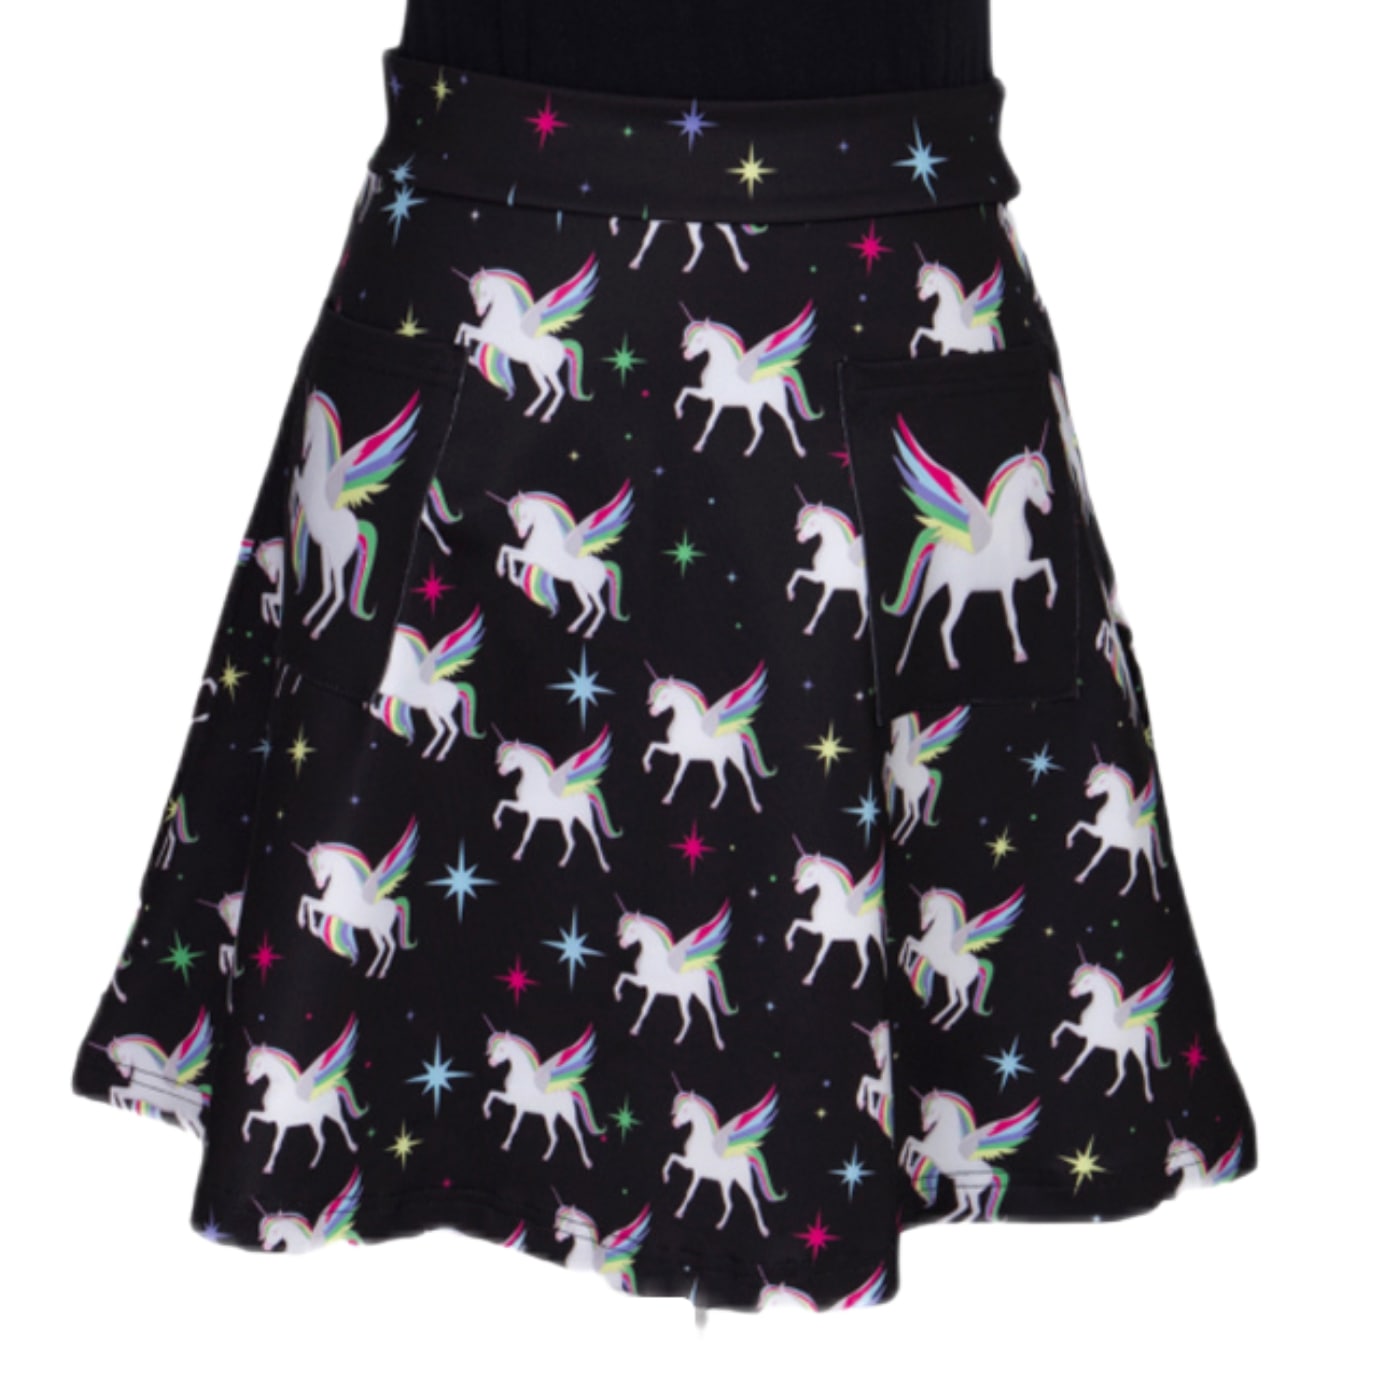 Blessing Short Skirt by RainbowsAndFairies.com.au (Unicorn - Winged Unicorn - Rainbow - Kitsch - Aline Skirt With Pockets - Vintage Inspired) - SKU: CL_SHORT_BLESS_ORG - Pic-02